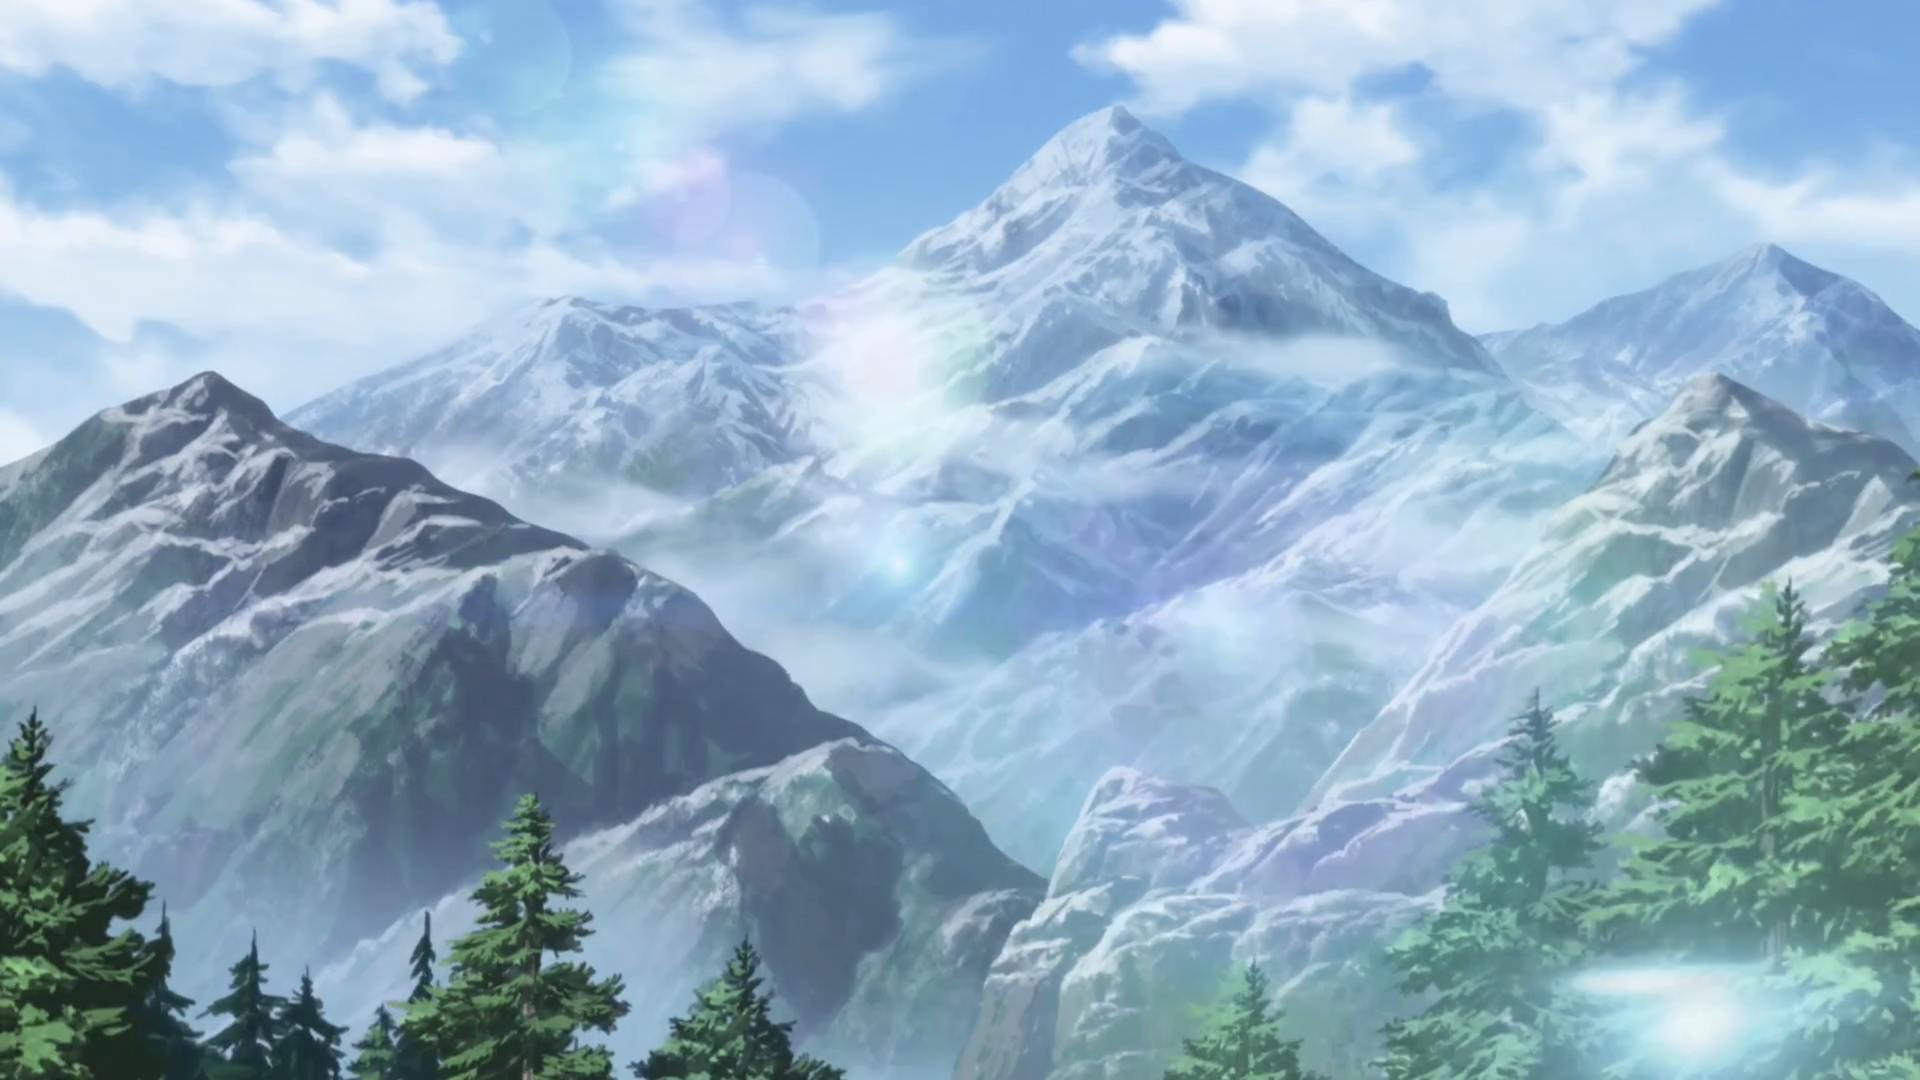 Anime Mountains - Anime scenery Wallpapers and Images - Desktop Nexus Groups